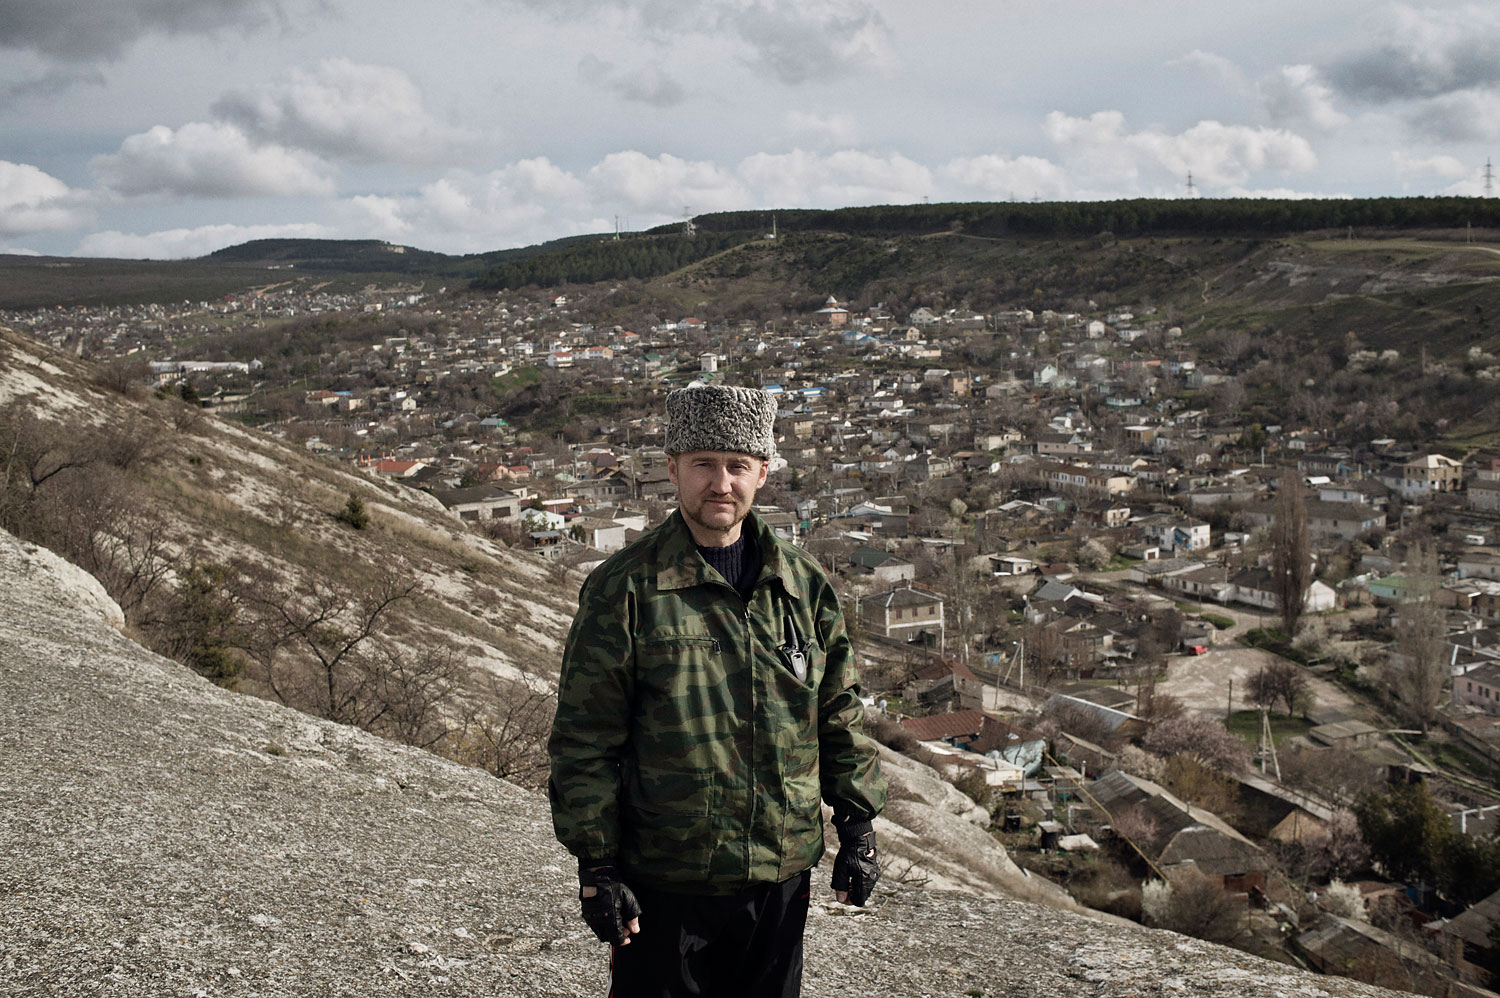 Sergei Yurchenko, the leader of a pro-Russian paramilitary force in Crimea, stands at a lookout point over his hometown Bakhchysarai, on March 16, 2014. (Yuri Kozyrev—NOOR for TIME)